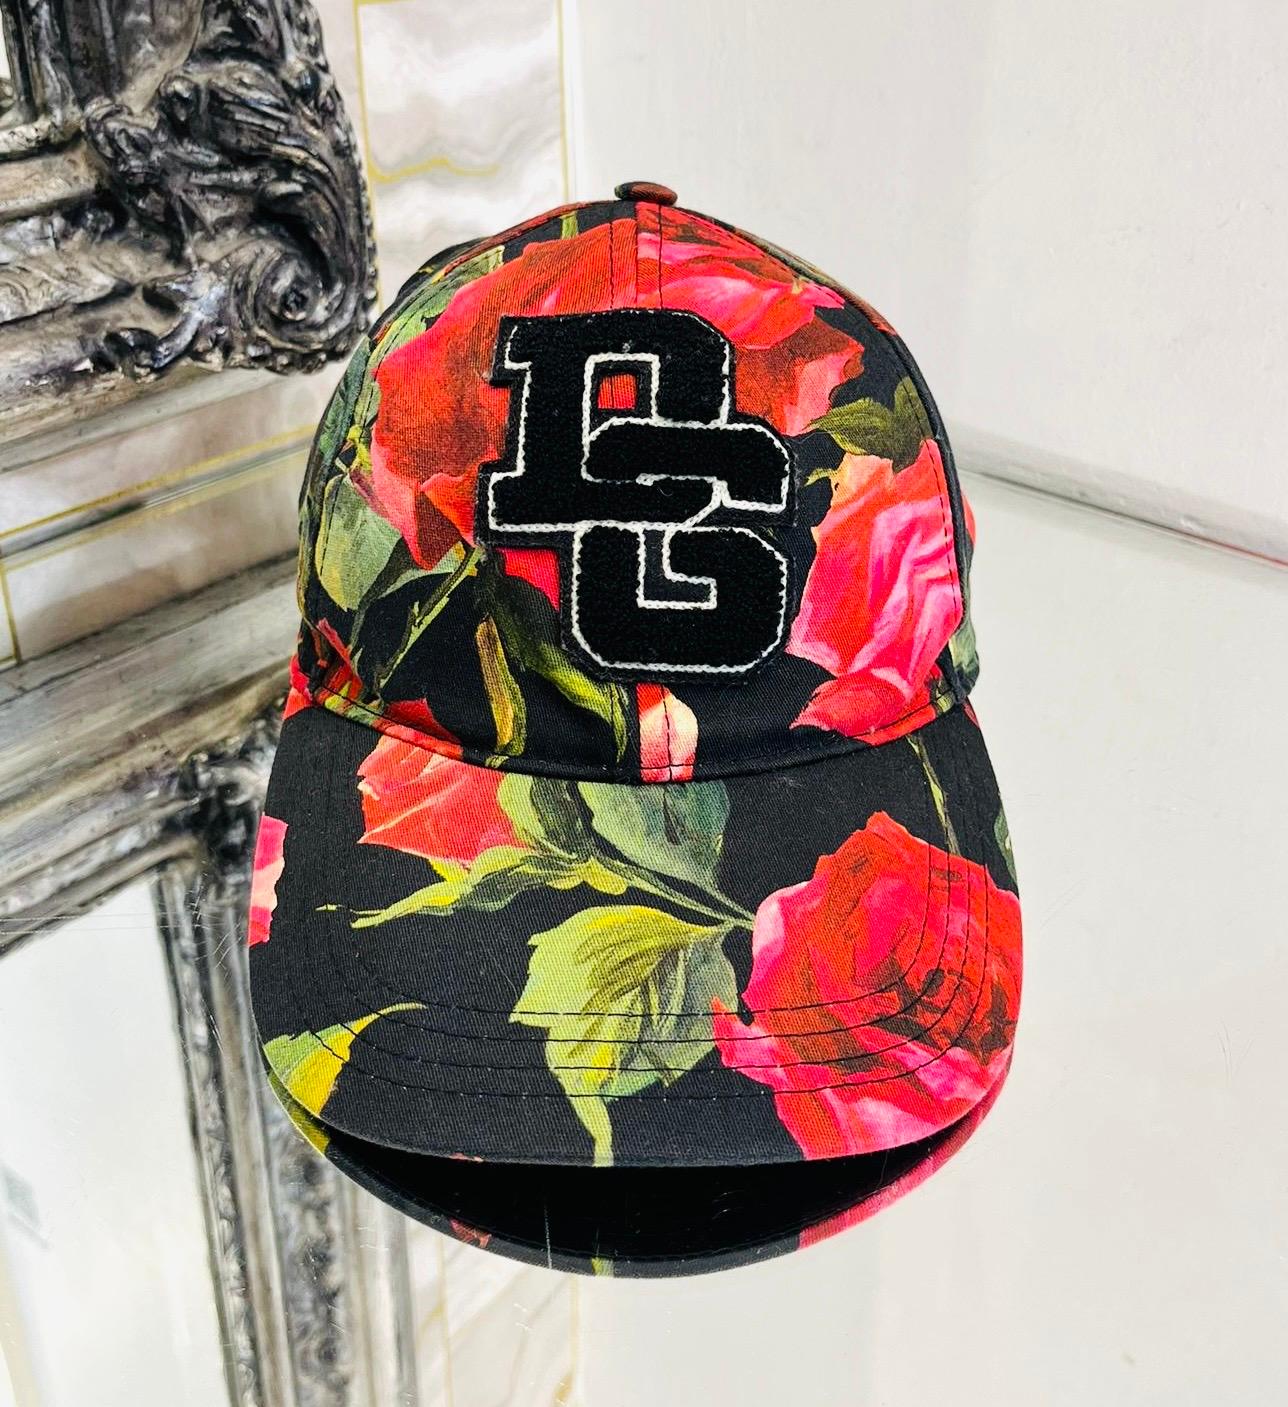 Dolce & Gabbana Floral Print 'DG' Logo Baseball Cap

Black cap designed with rose print in red and green.

Detailed with black 'DG' logo to the front and adjustable, 'Dolce & Gabbana' logo engraved buckle to rear.

Featuring gros-grain interior